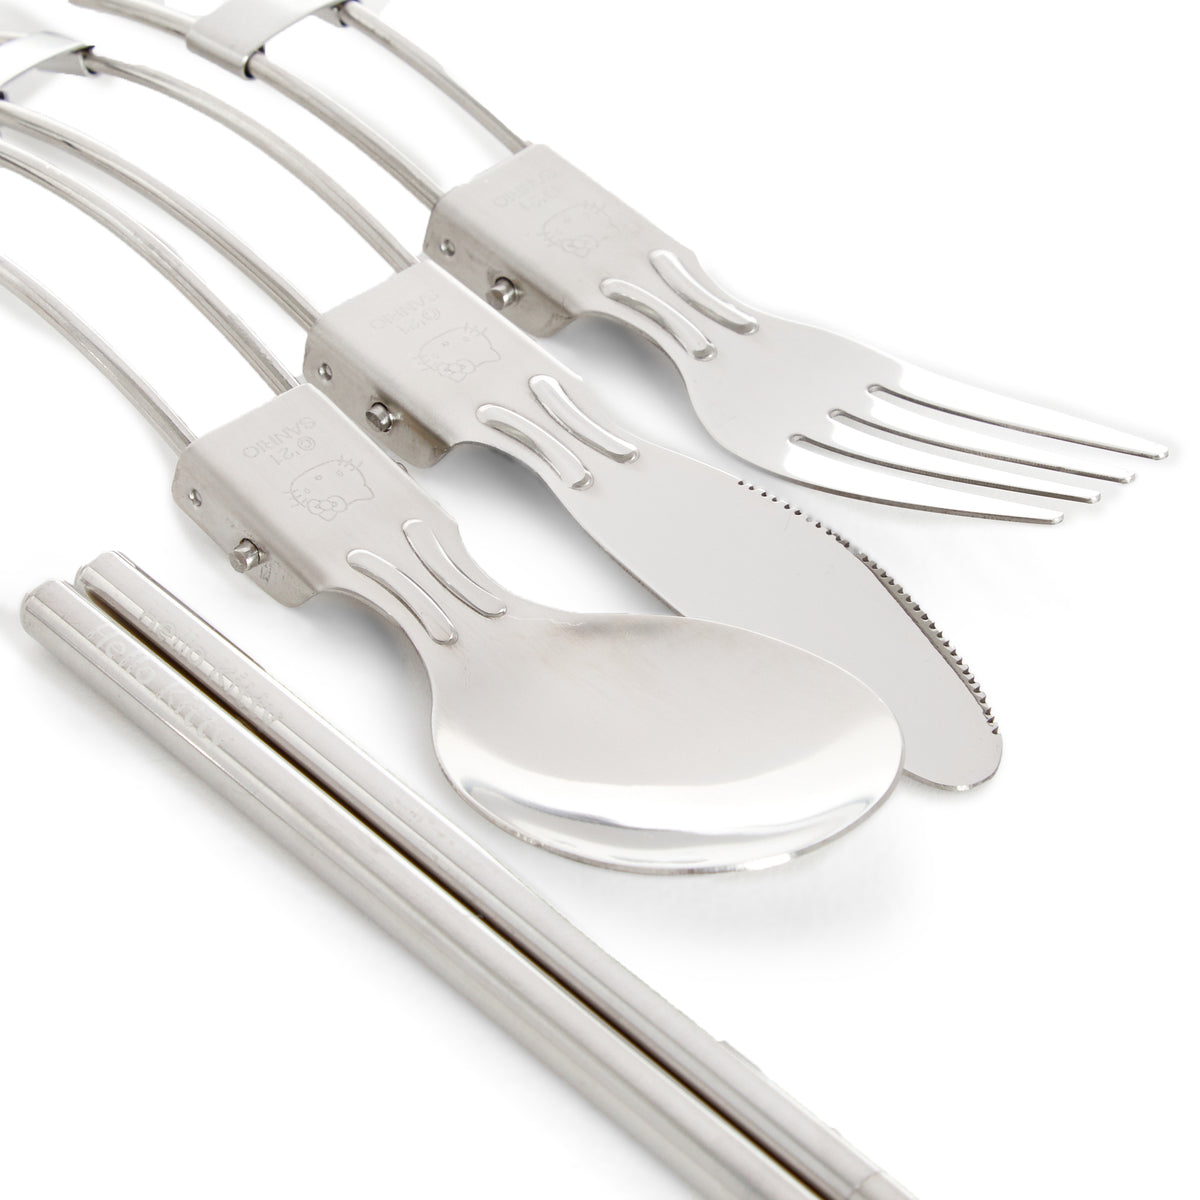 Sanrio Hello Kitty Stainless Steel Fork & Knife Set Kitchen Home Dinning Supper Tool Kids Ladies